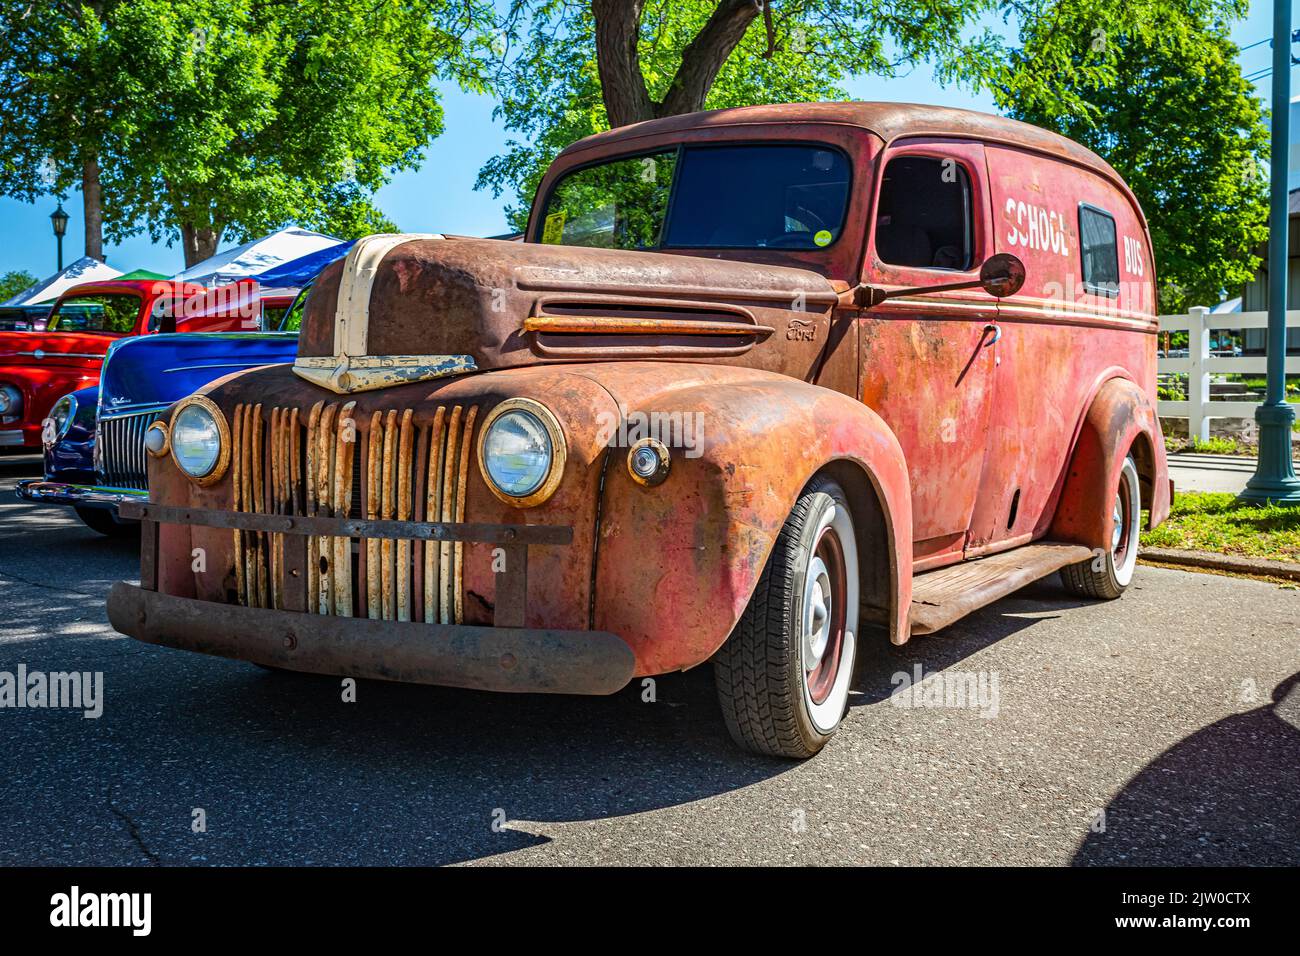 Falcon Heights, MN - June 17, 2022: Low perspective front corner view of an old  1947 Ford Panel Delivery Truck School Bus at a local car show. Stock Photo